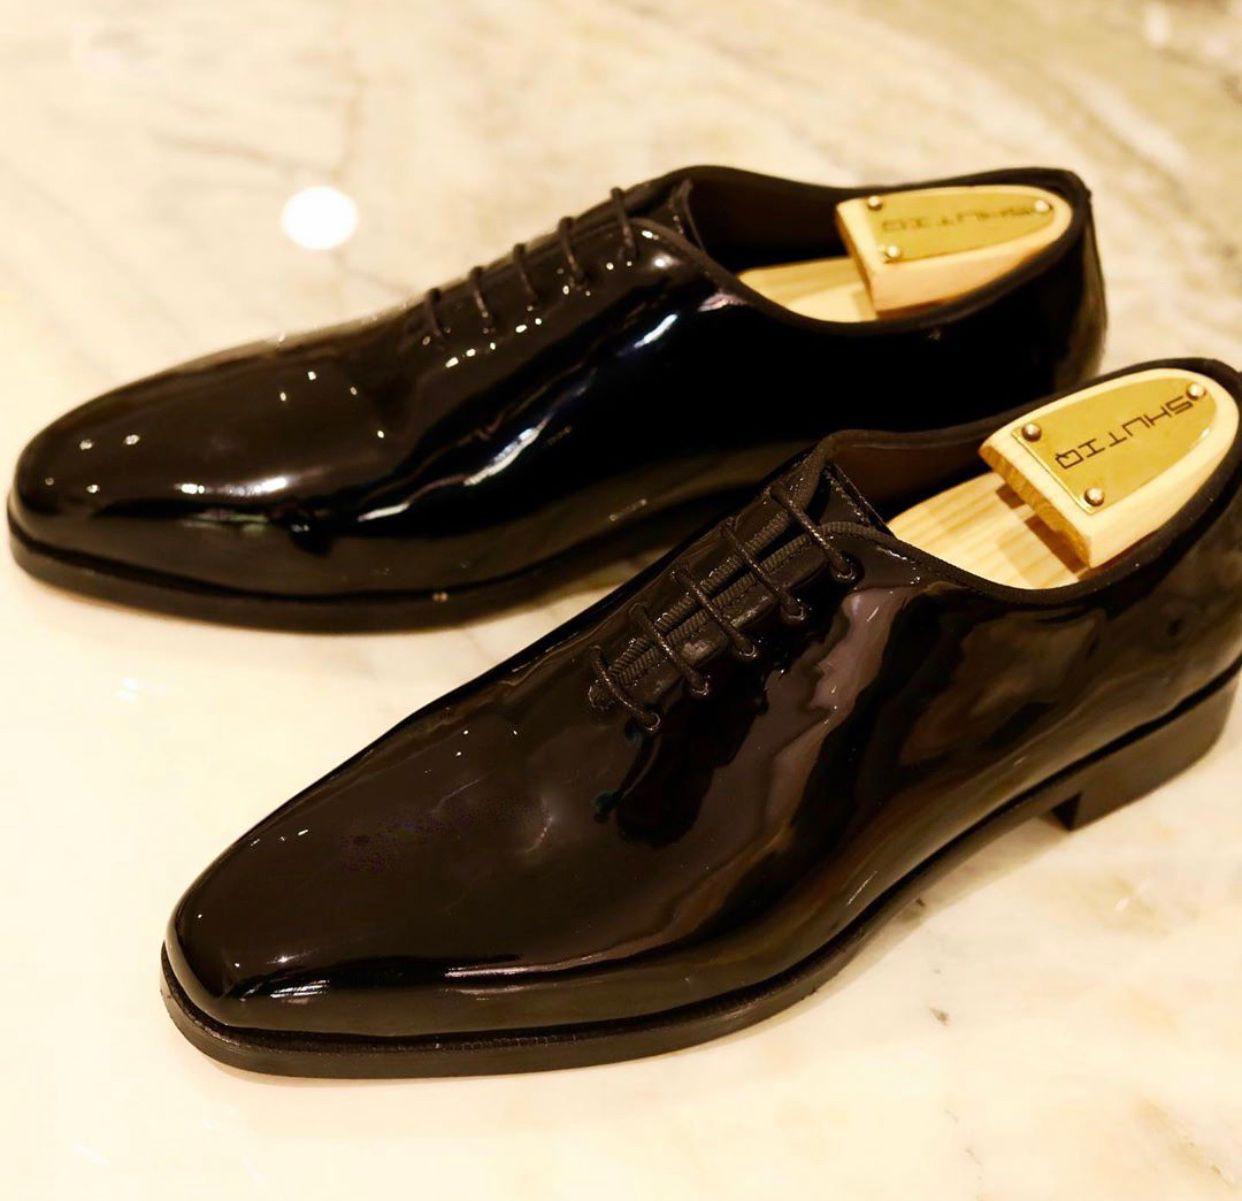 Buy Now Fashion Classy Shiny Black Formal Shoes For Men- JackMarc